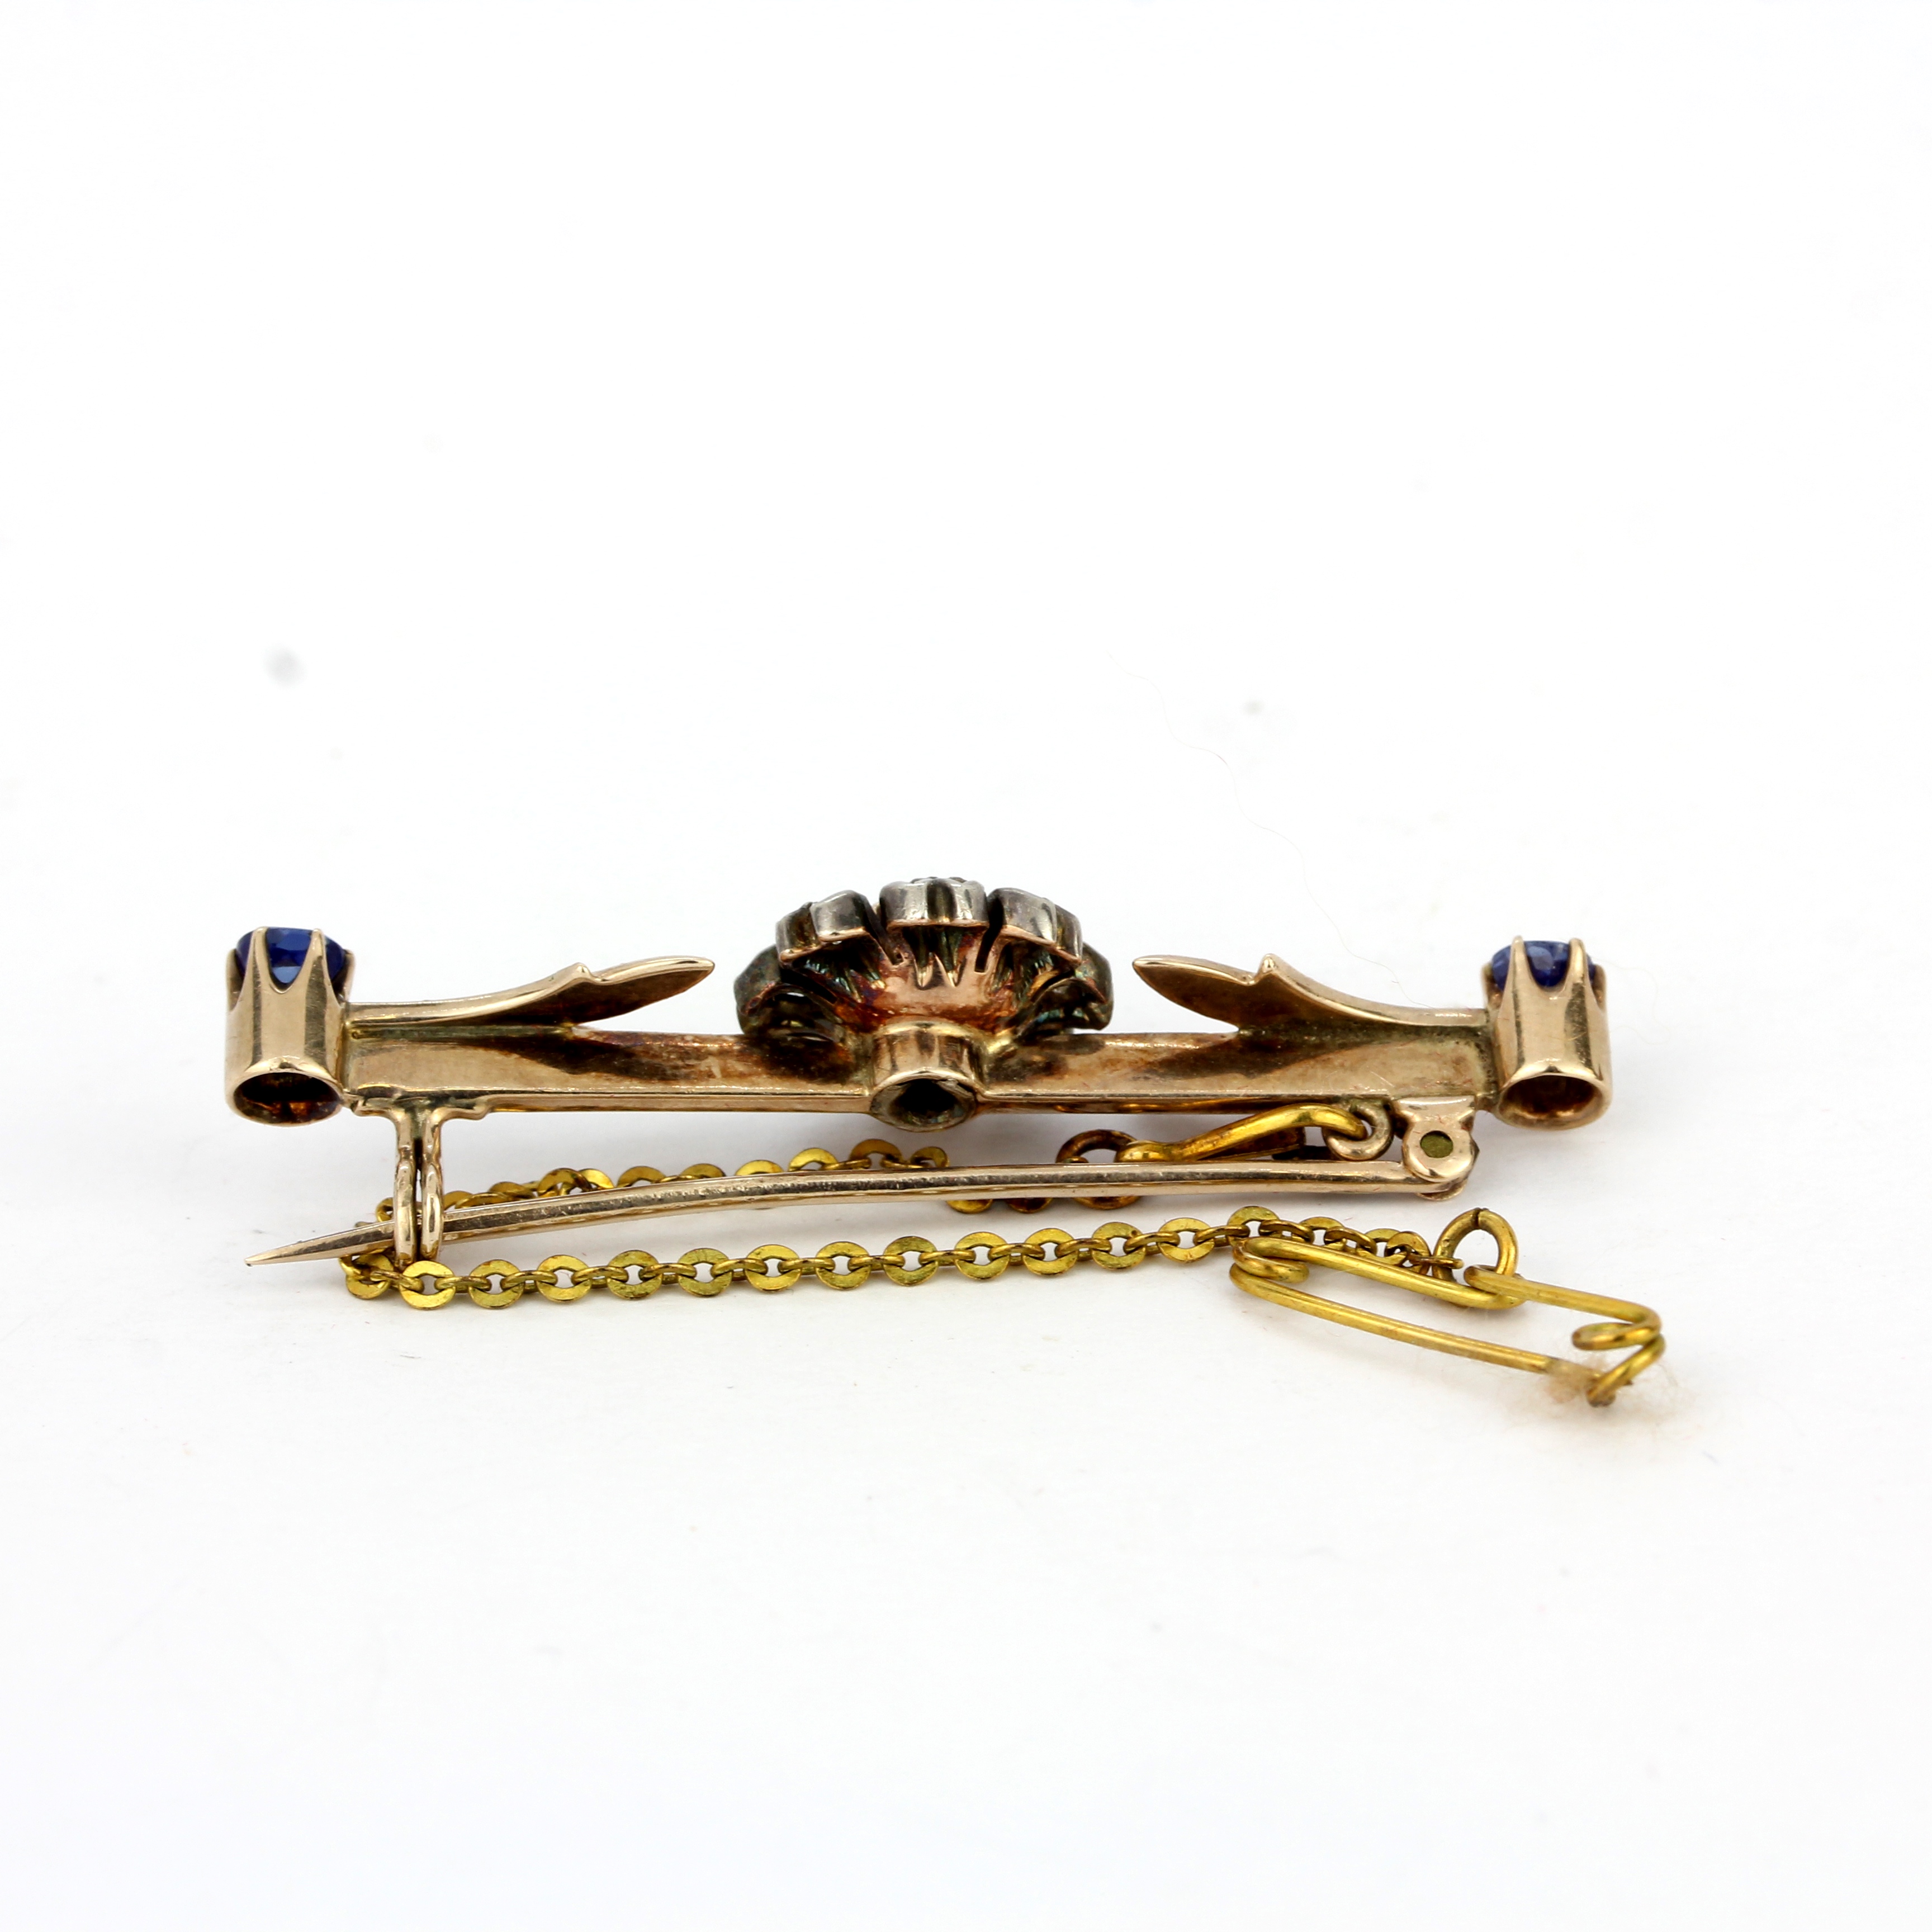 A rose metal (tested minimum 9ct gold) brooch set with sapphires and diamonds, L. 4.5cm. - Image 2 of 4